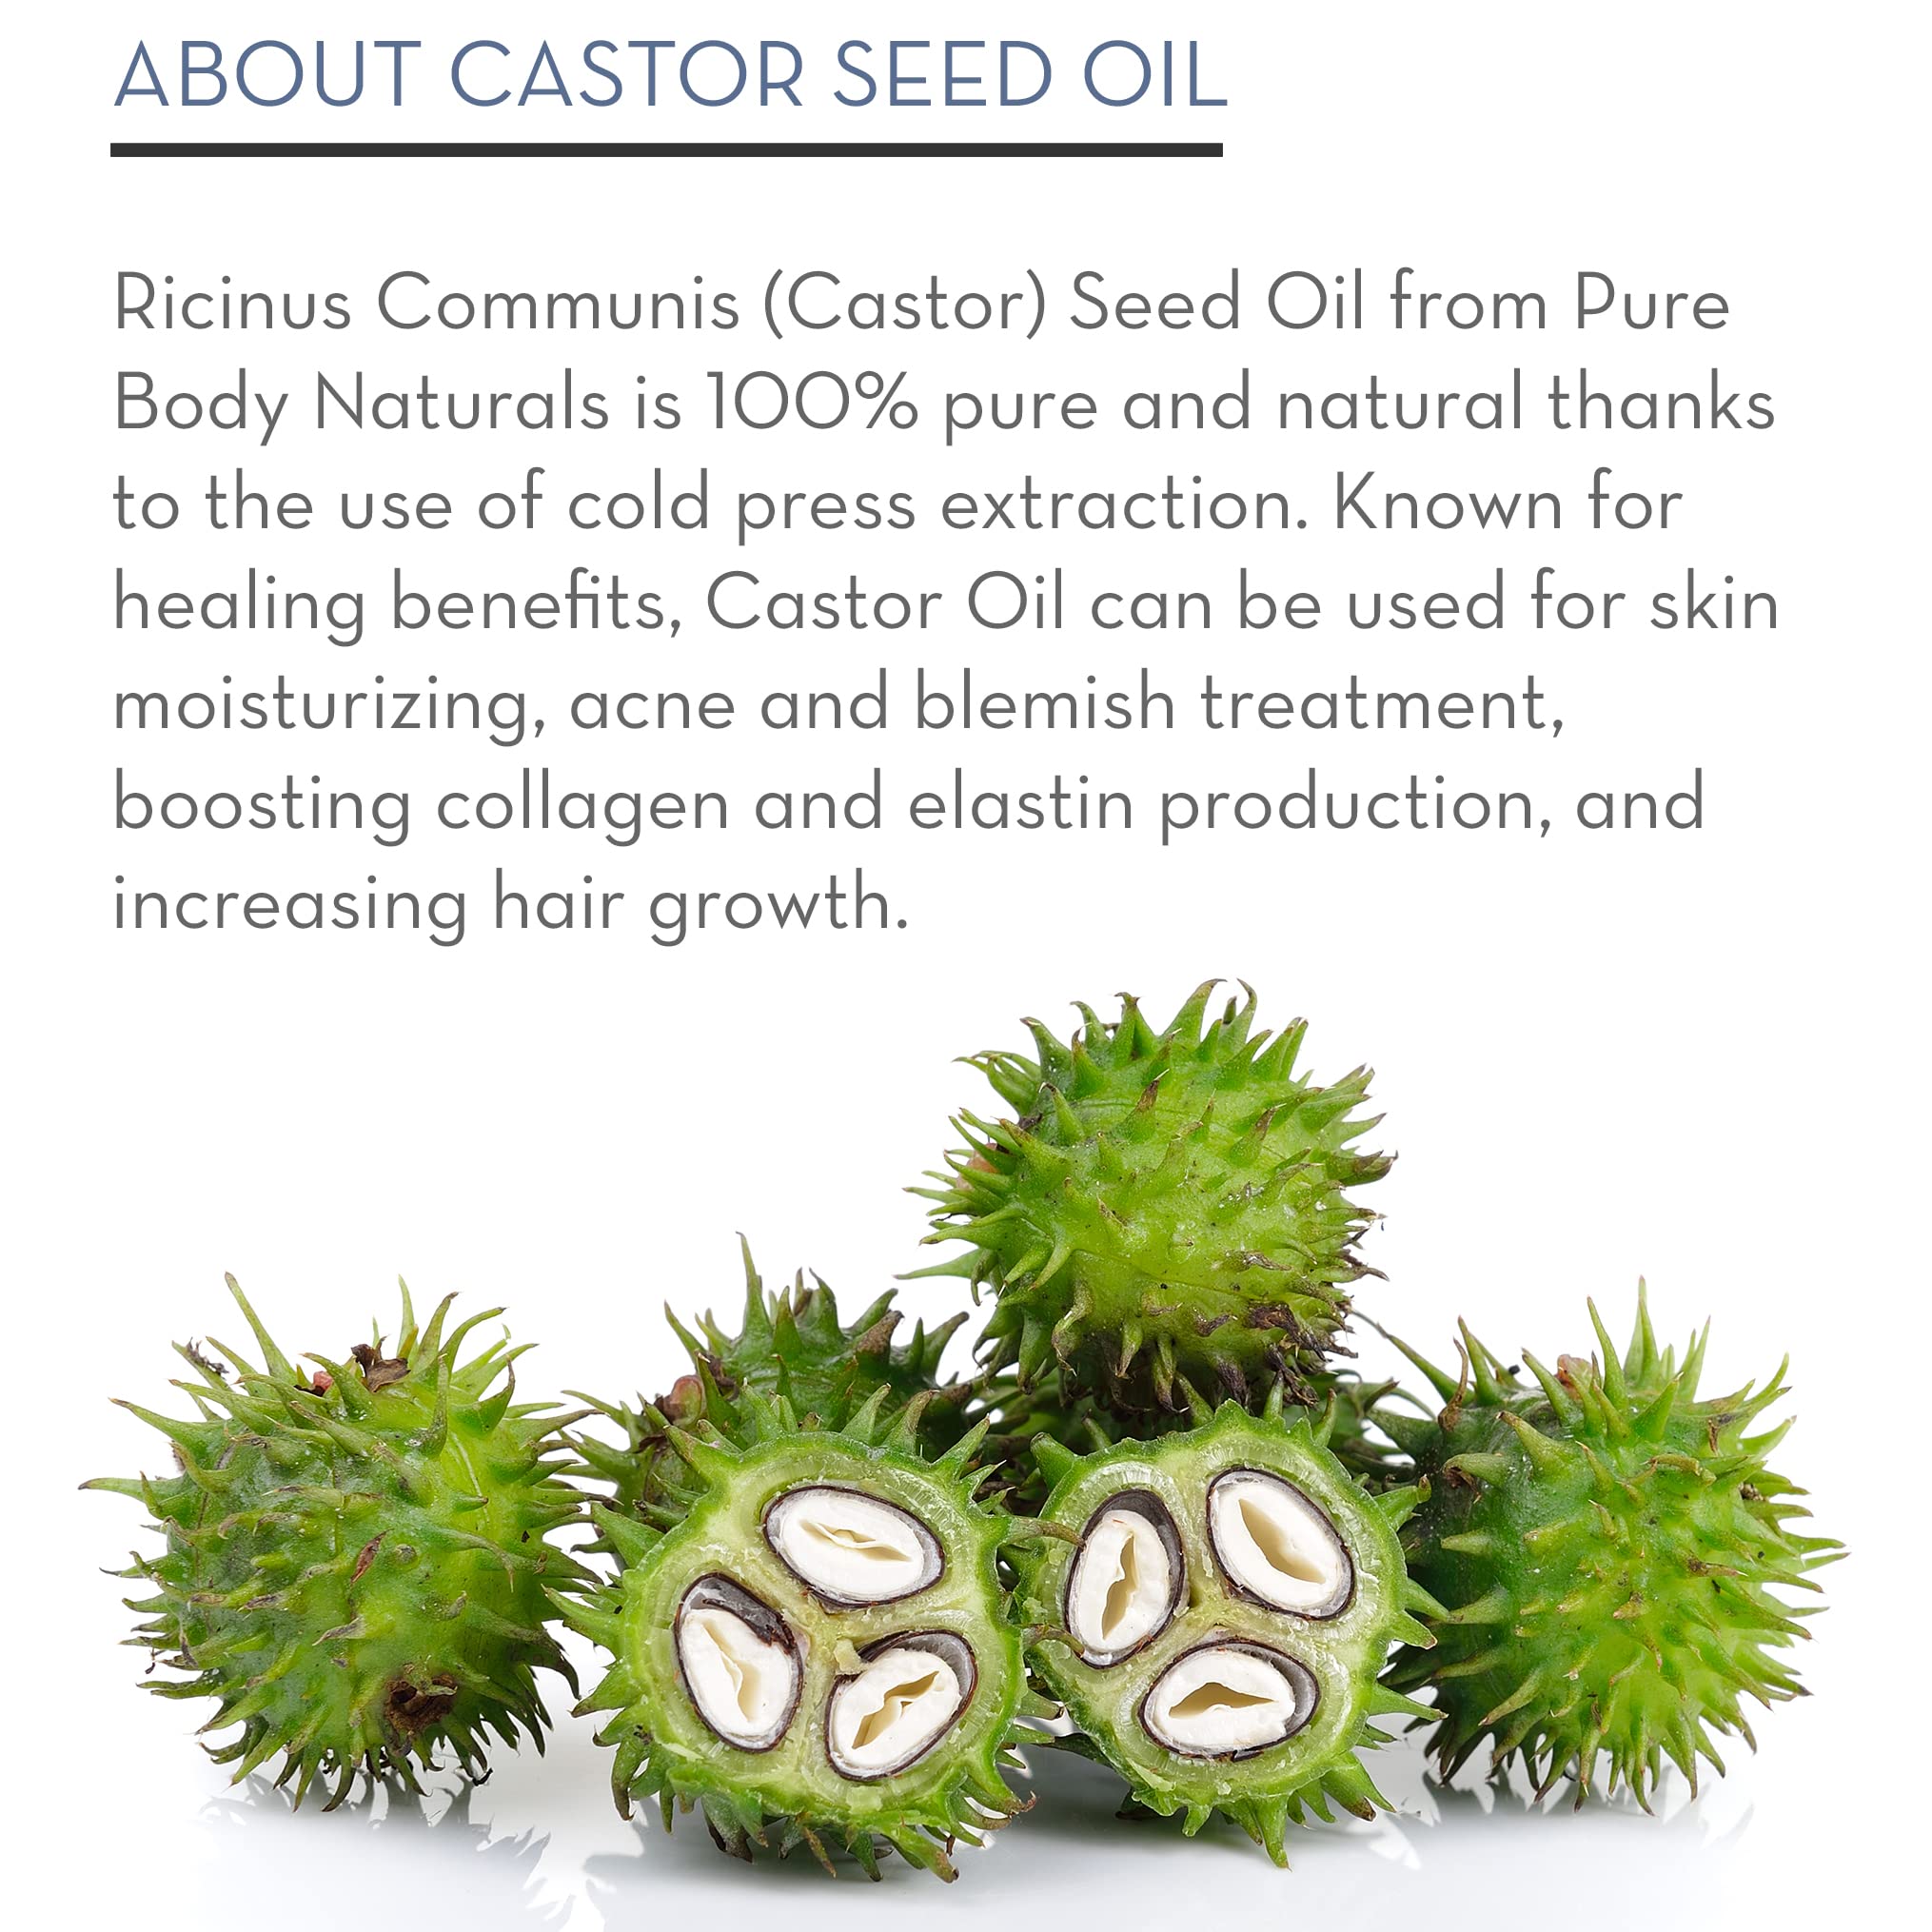 Castor Oil for Eyelashes and Eyebrows - Brow and Lash Growth Serum - Organic Hexane Free Cold Pressed Unrefined - 1 fl oz - Pure Body Naturals